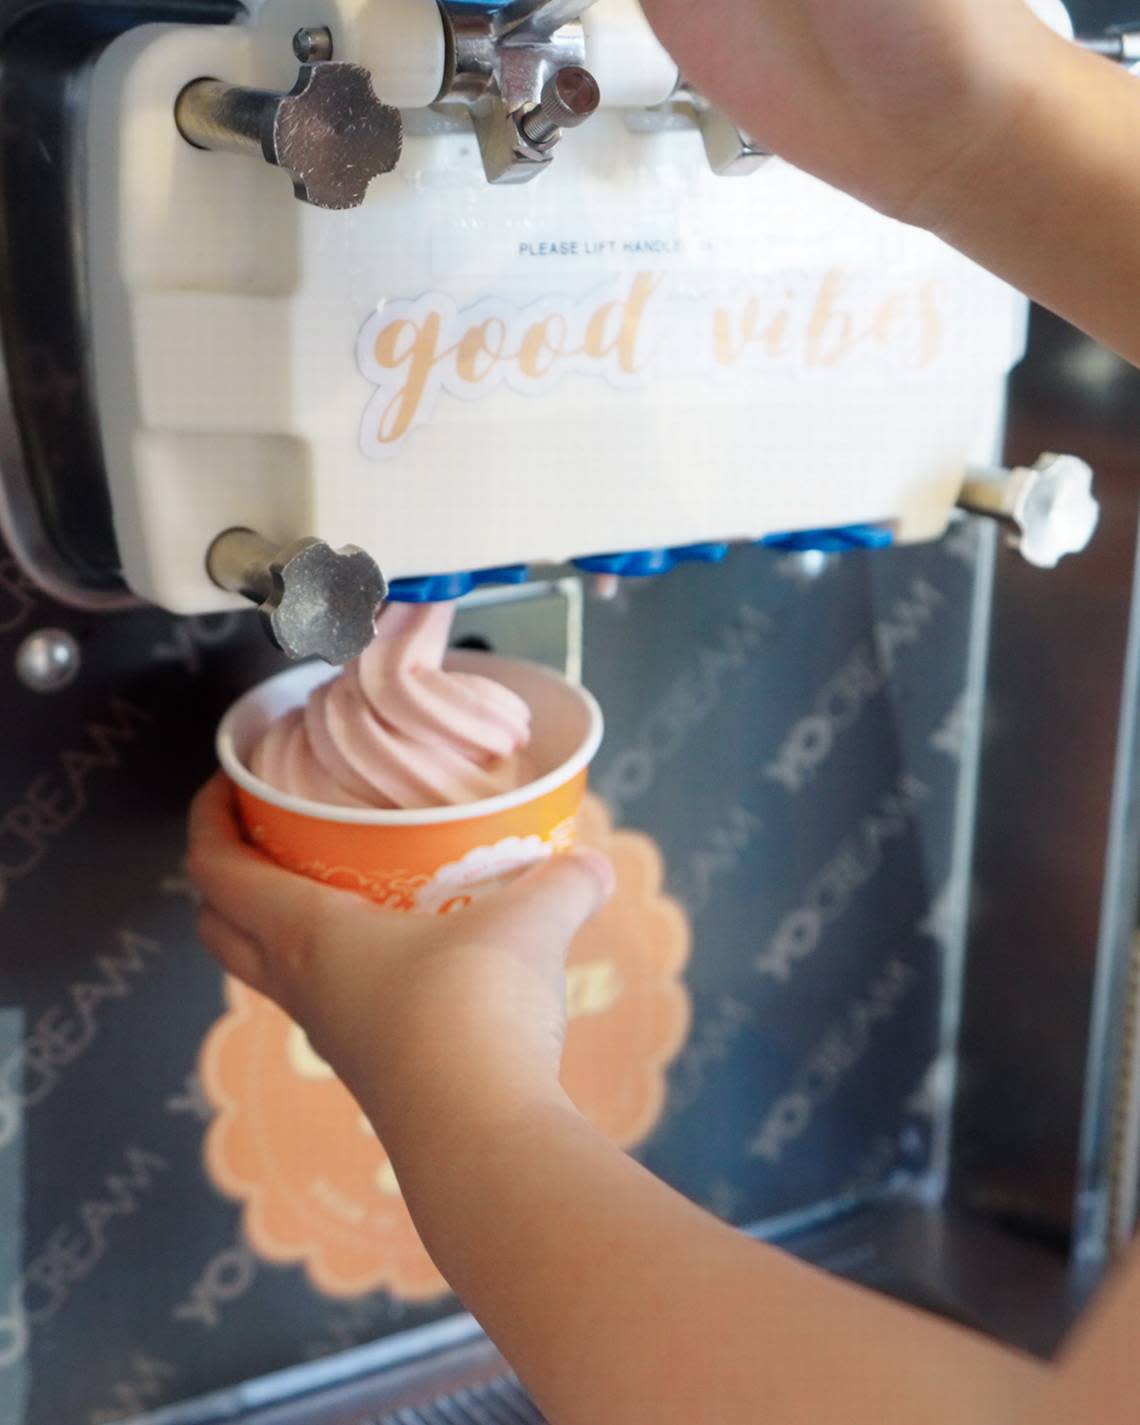 At Cuppa Yo, people fill their cups with frozen yogurt and toppings then pay by the ounce.